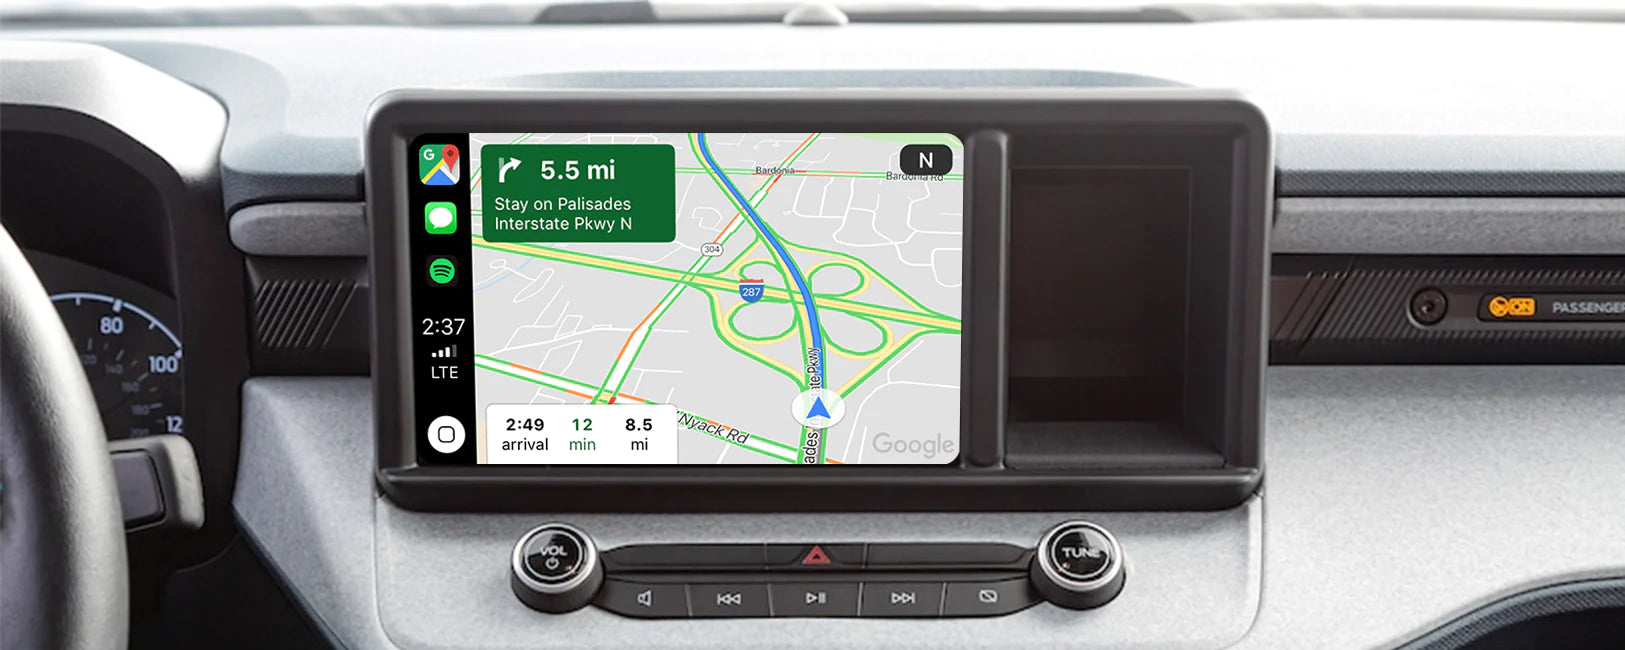 Carlinkit-A2A-draadloze-Android-Auto-adapter-ondersteuning-Real-time-navigatie